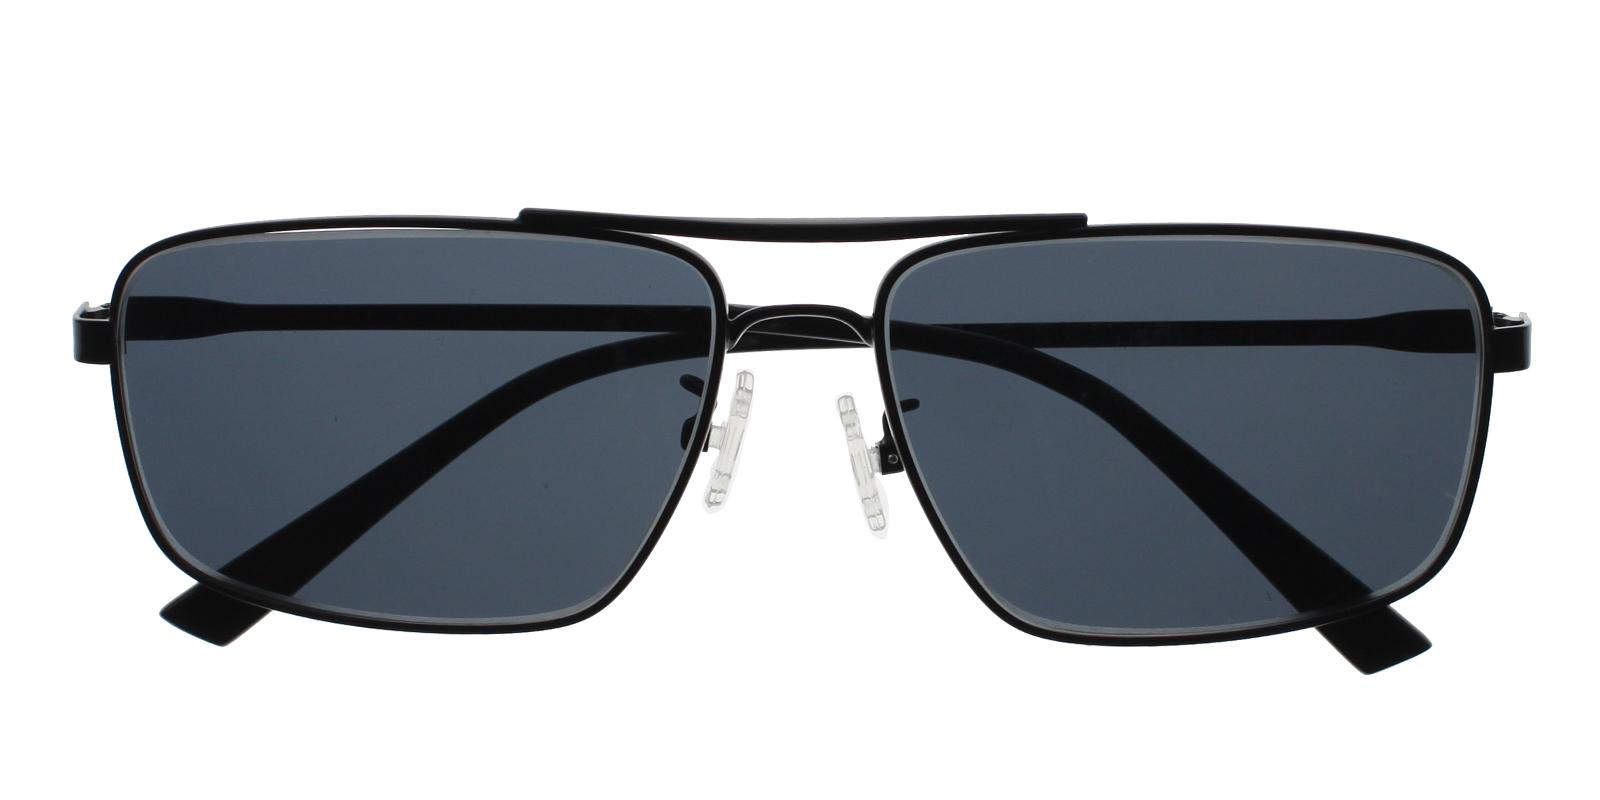 Ethan Black Metal NosePads , Sunglasses Frames from ABBE Glasses